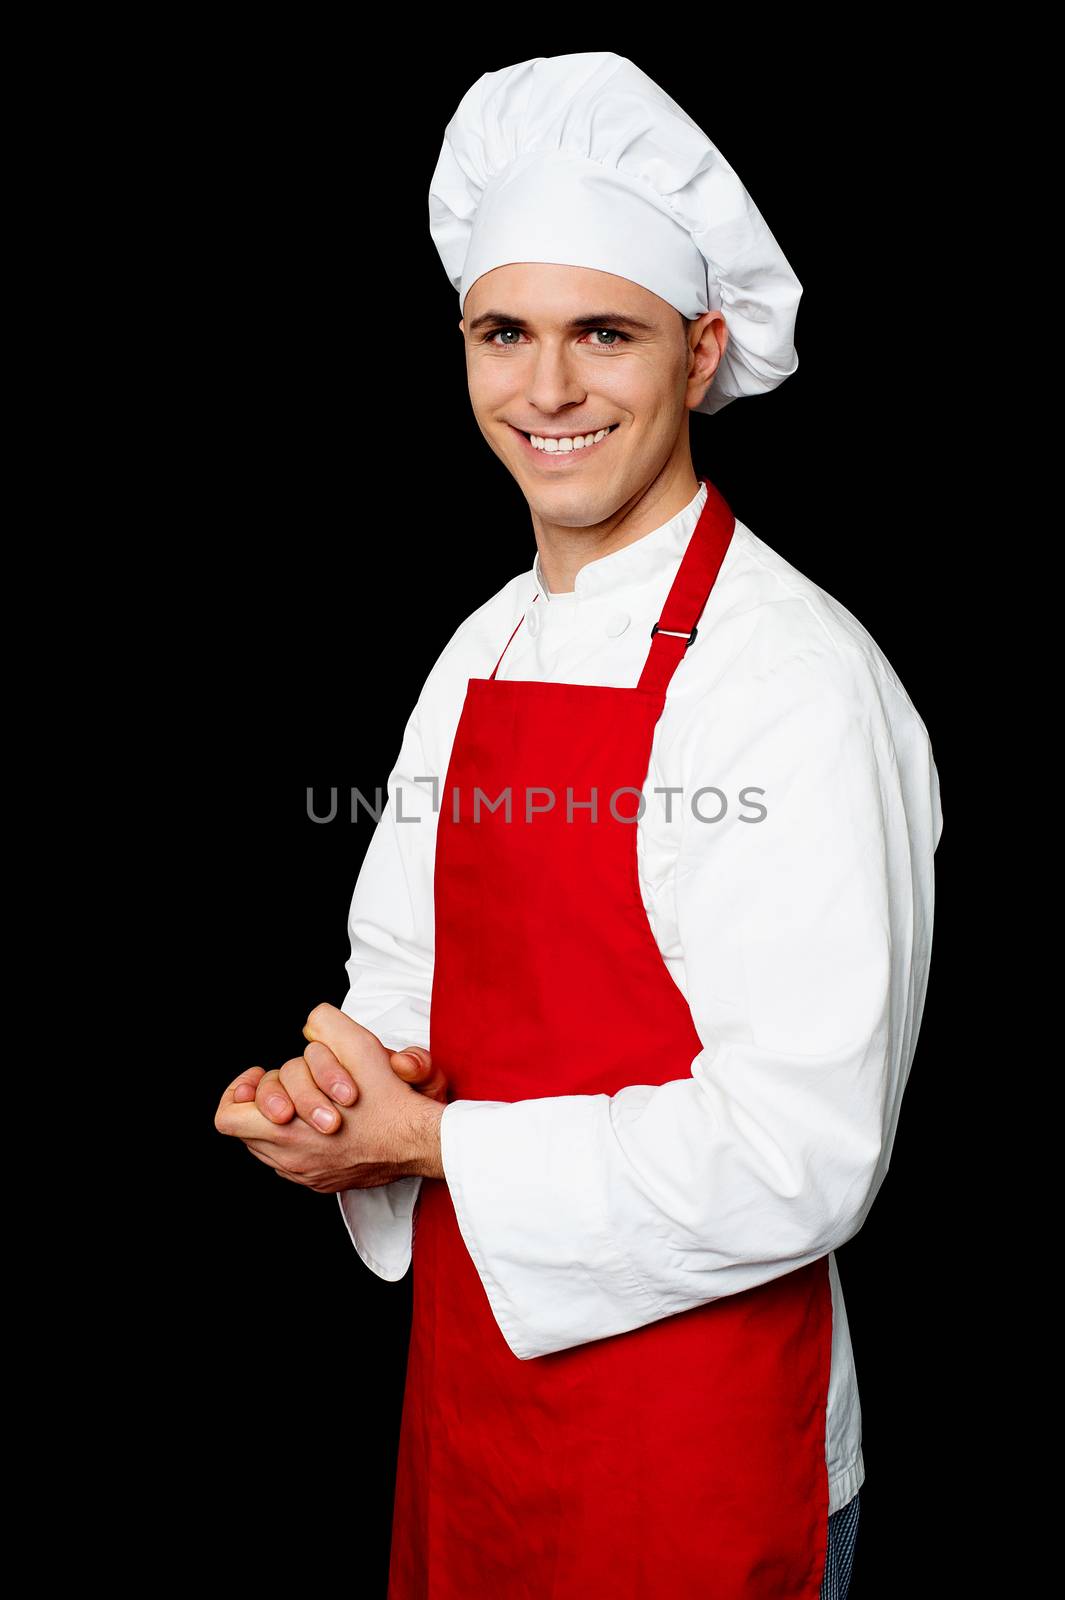 Portrait of a handsome chef by stockyimages